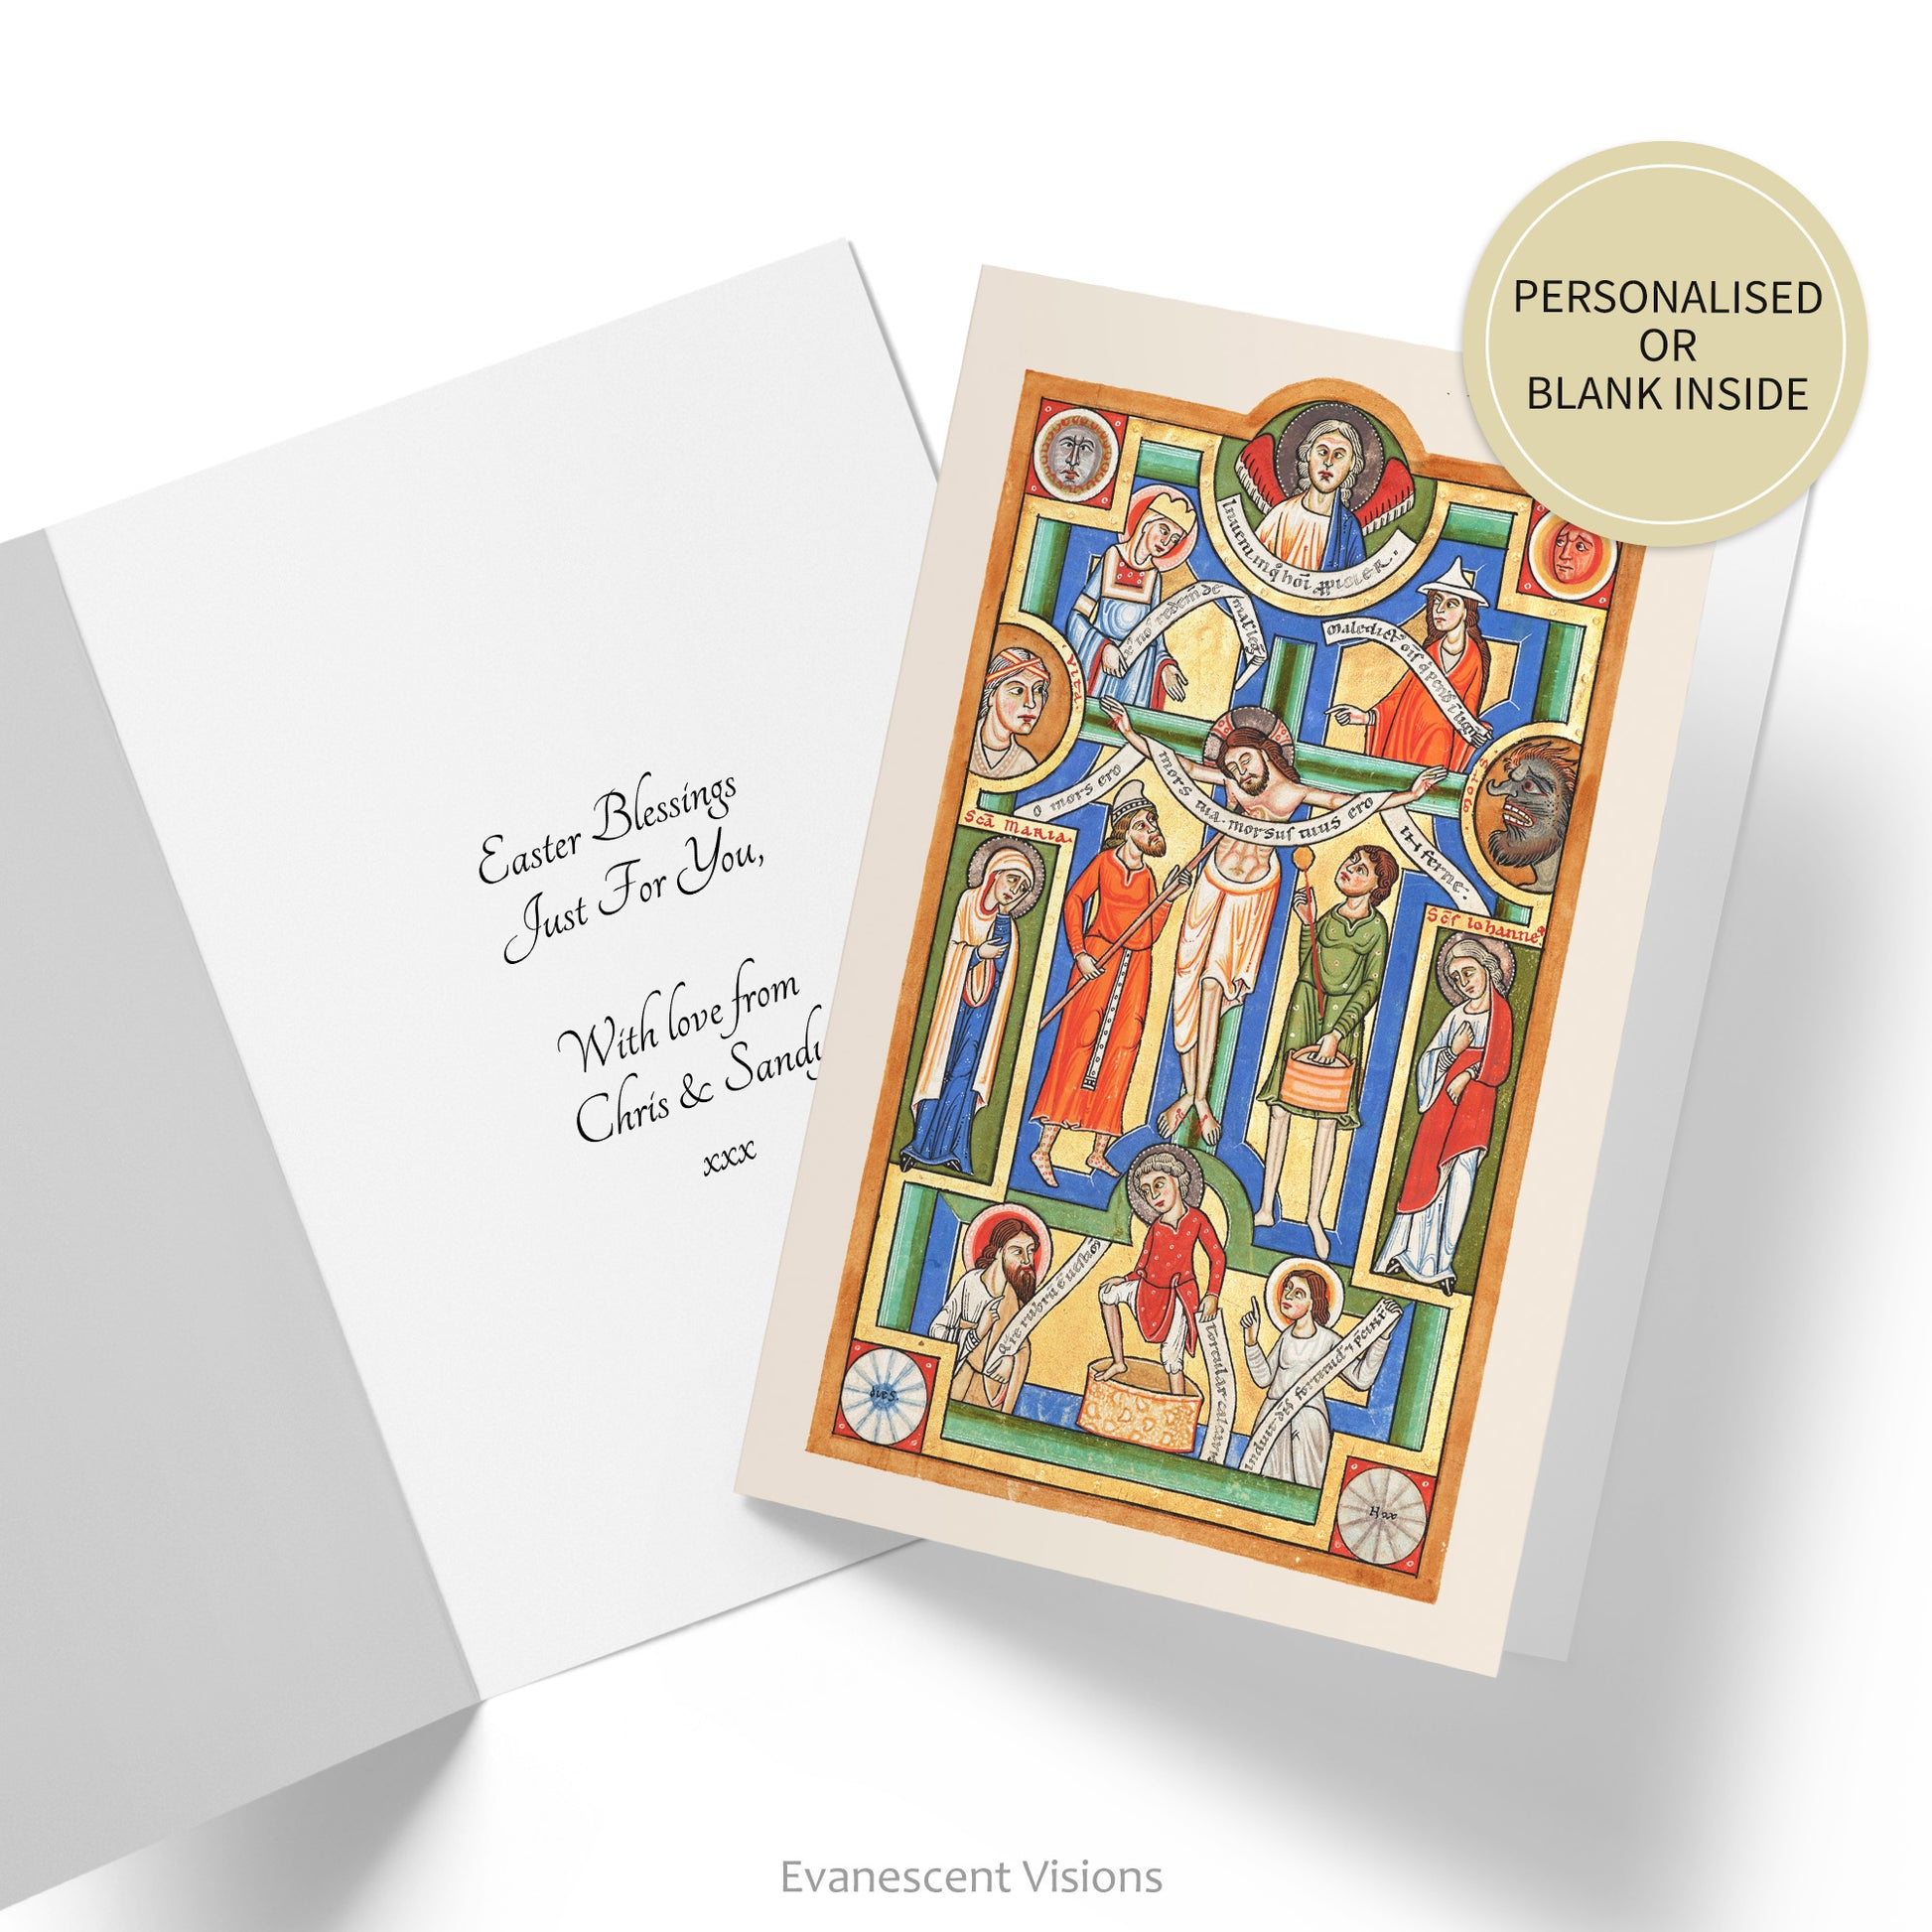 Card with Medieval Illumination, 'The Crucifixion' and inside card shown with custom image. Sticker says 'personalised or blank.'